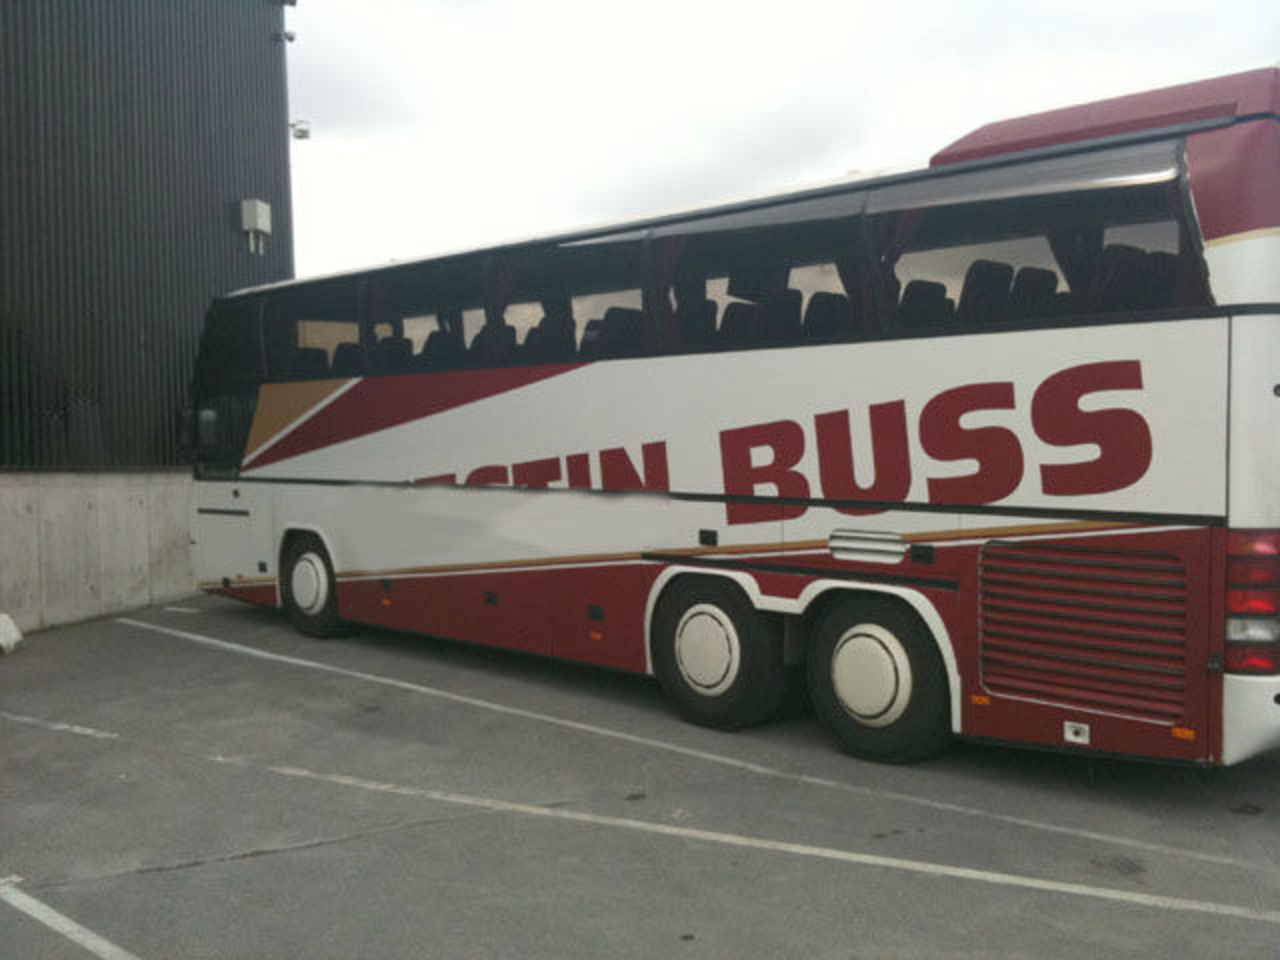 Neoplan N1163: Photo gallery, complete information about model ...